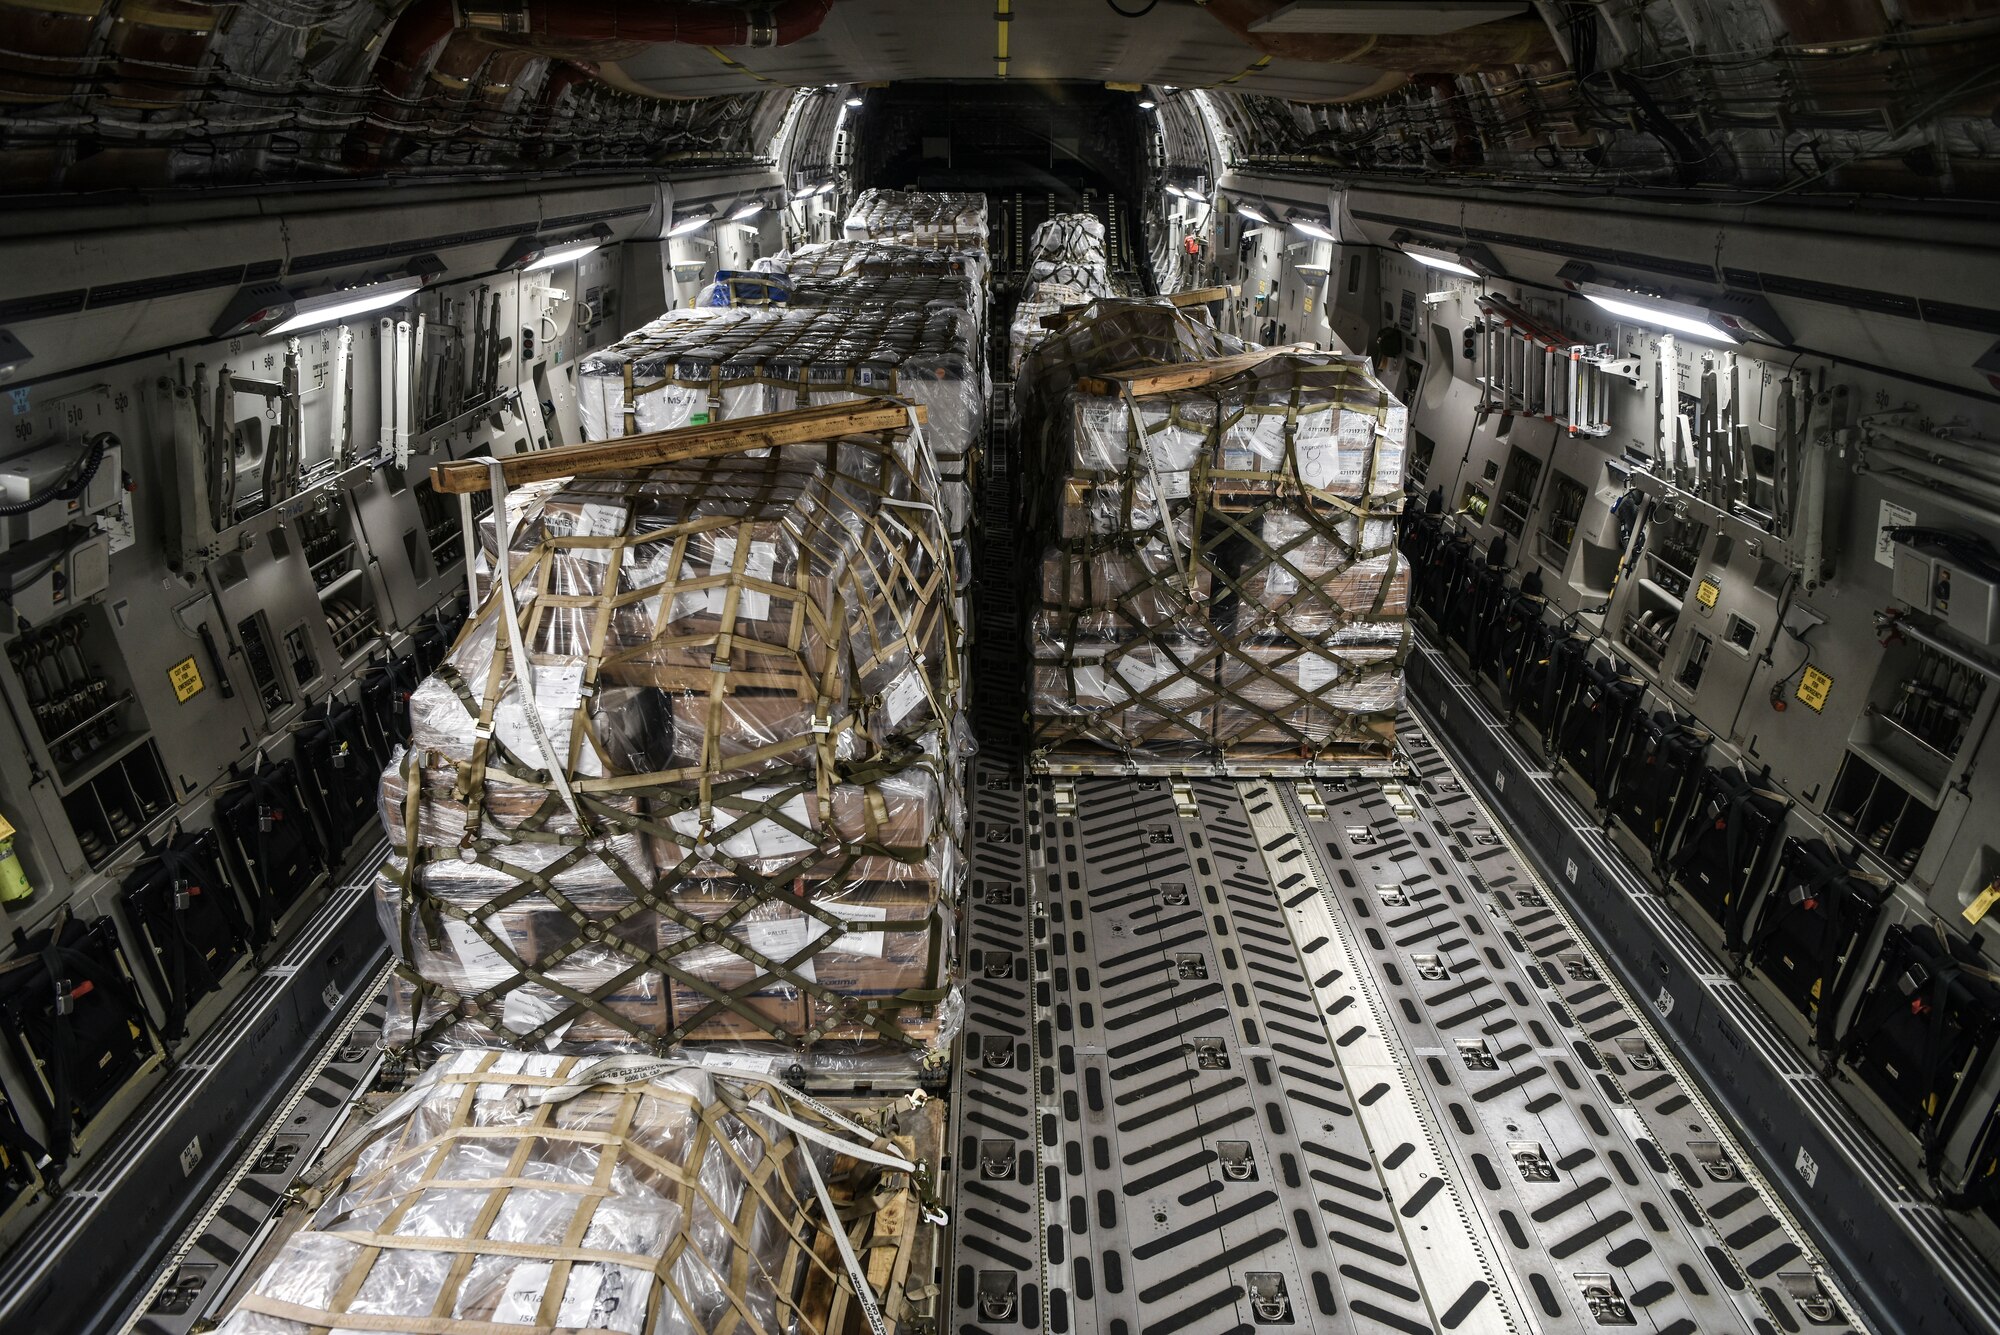 U.S. Air Force Airmen and civilians assigned to the 735th Air Mobility Squadron, load 31,063 pounds of cargo containing COVID-19 personal protective equipment and medical supplies at Joint Base Pearl Harbor-Hickam, Hawaii, April  3, 2020. The 735th AMS provided support to the Mariana Islands in response to the COVID-19 pandemic.  (U.S. Air Force photo by Tech. Sgt. Anthony Nelson Jr.)